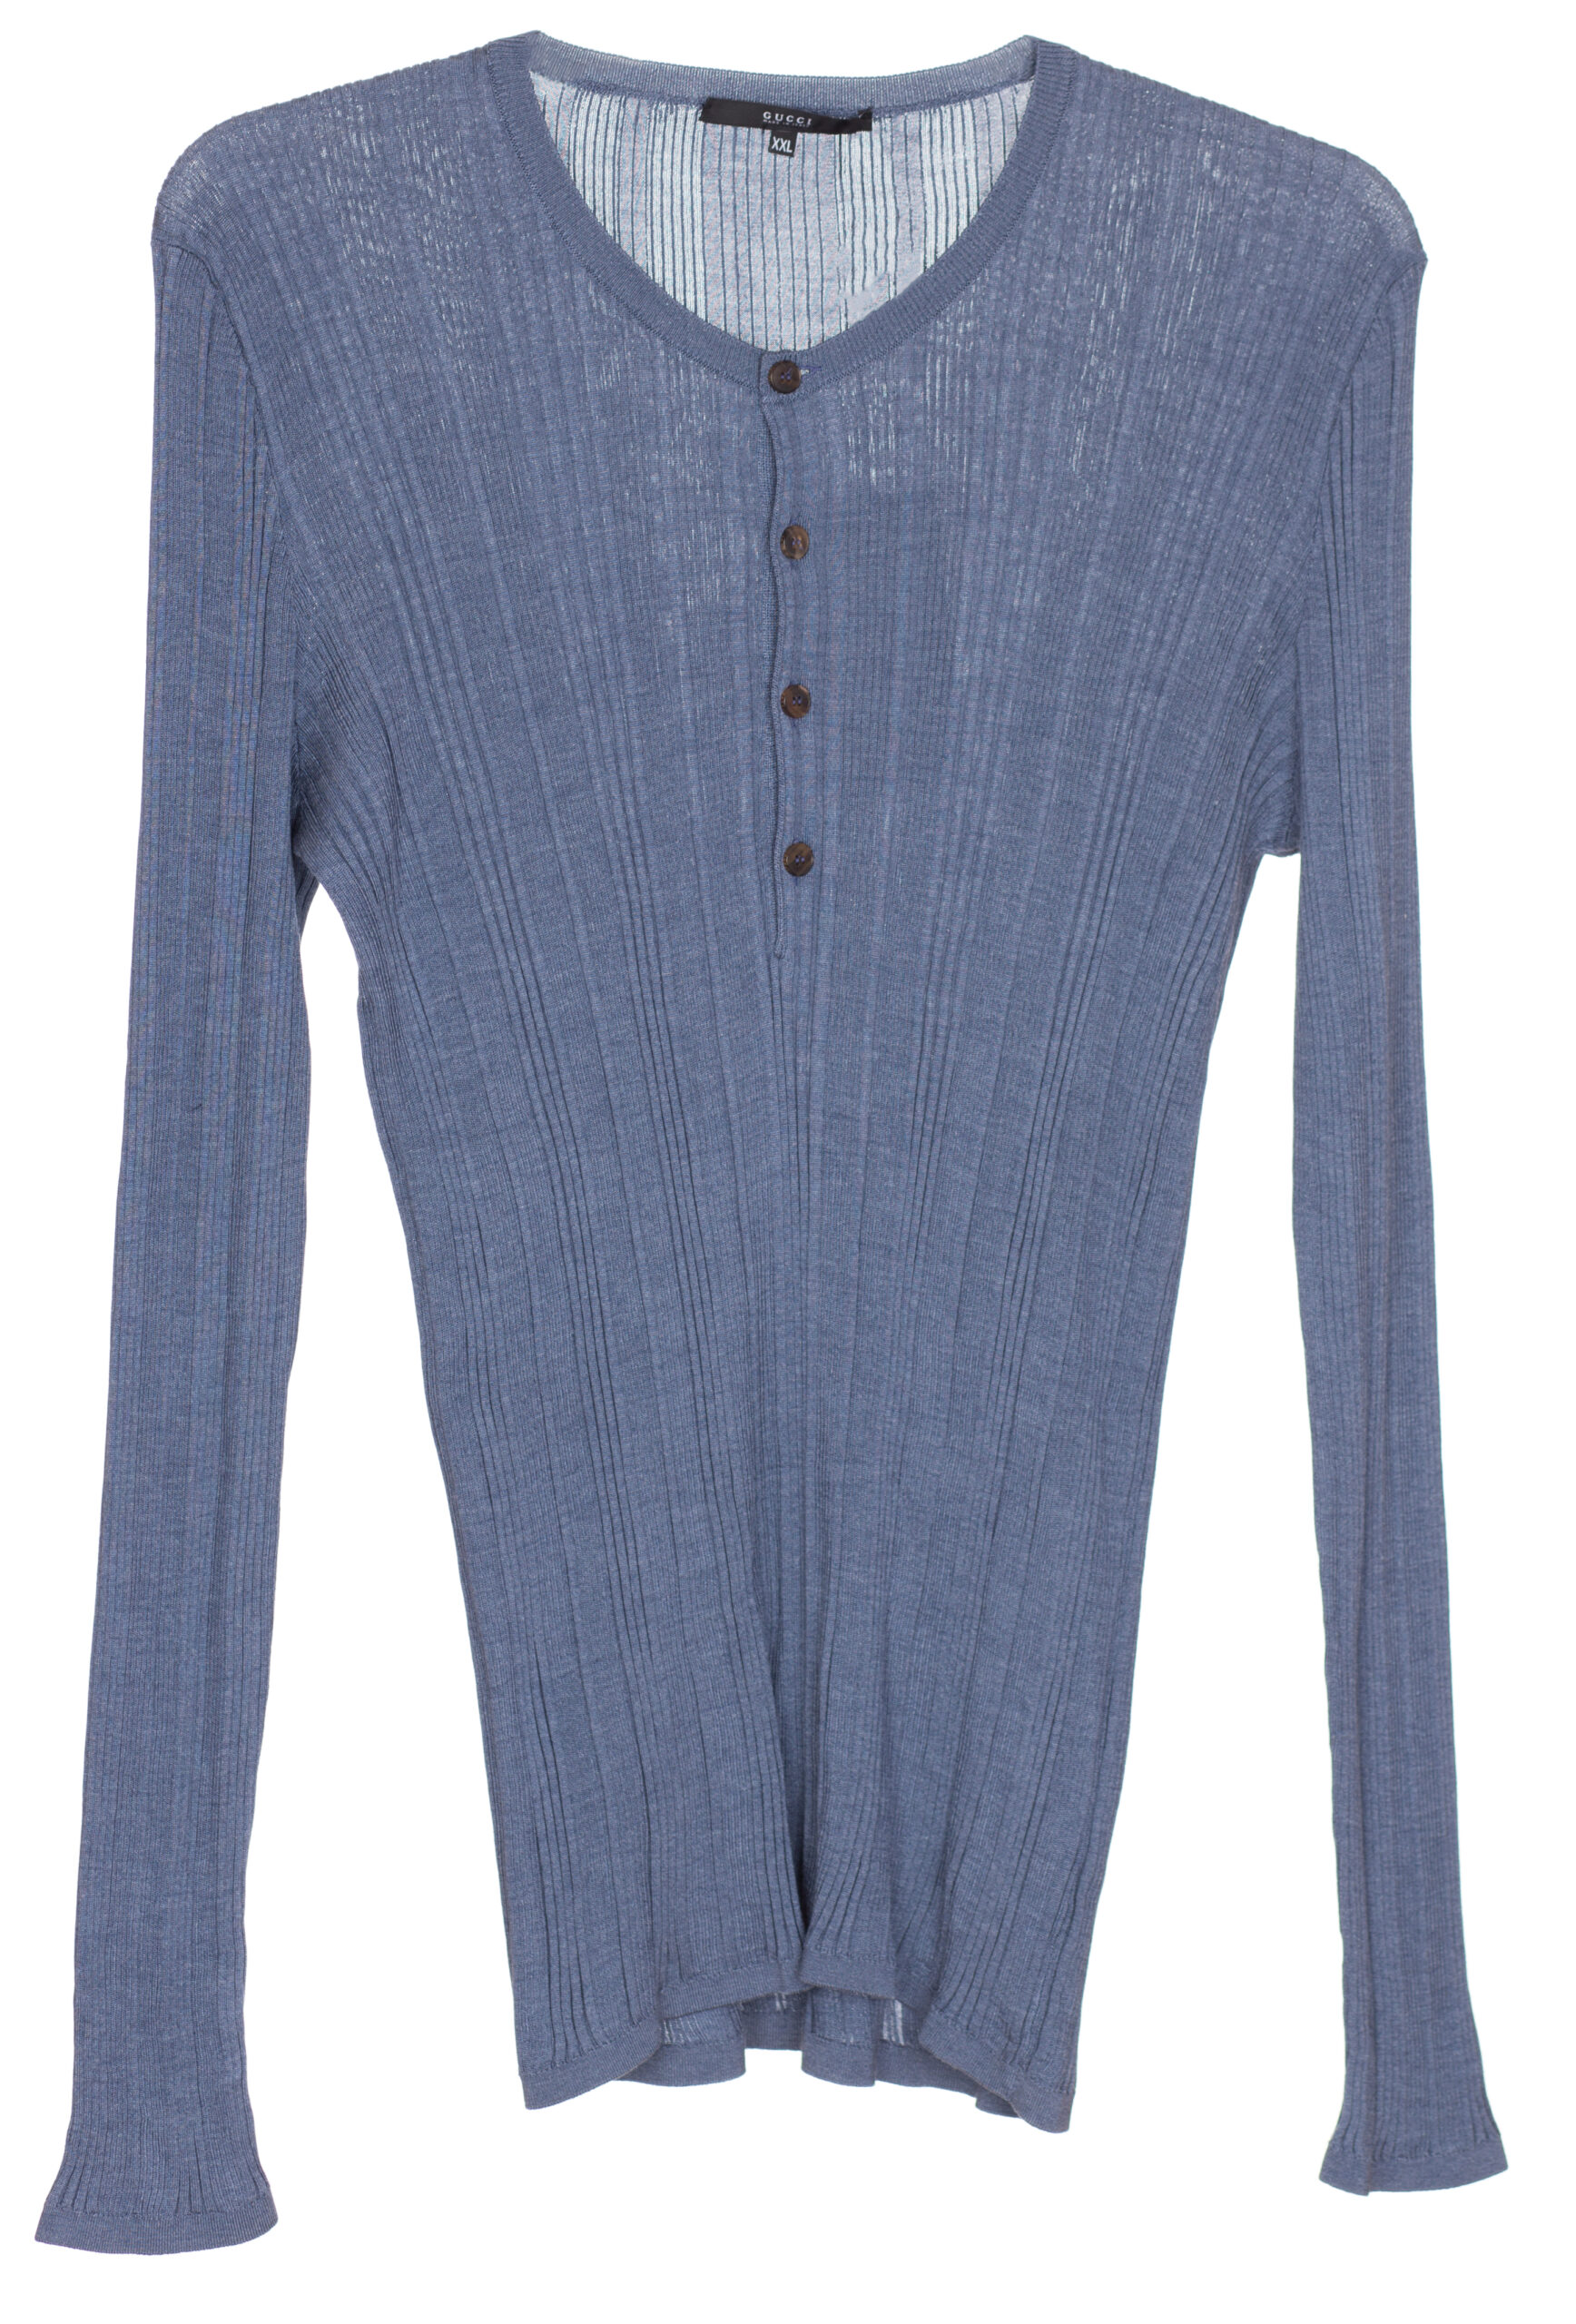 www.couturepoint.com-gucci-mens-blue-100-silk-crewneck-ribbed-sweater